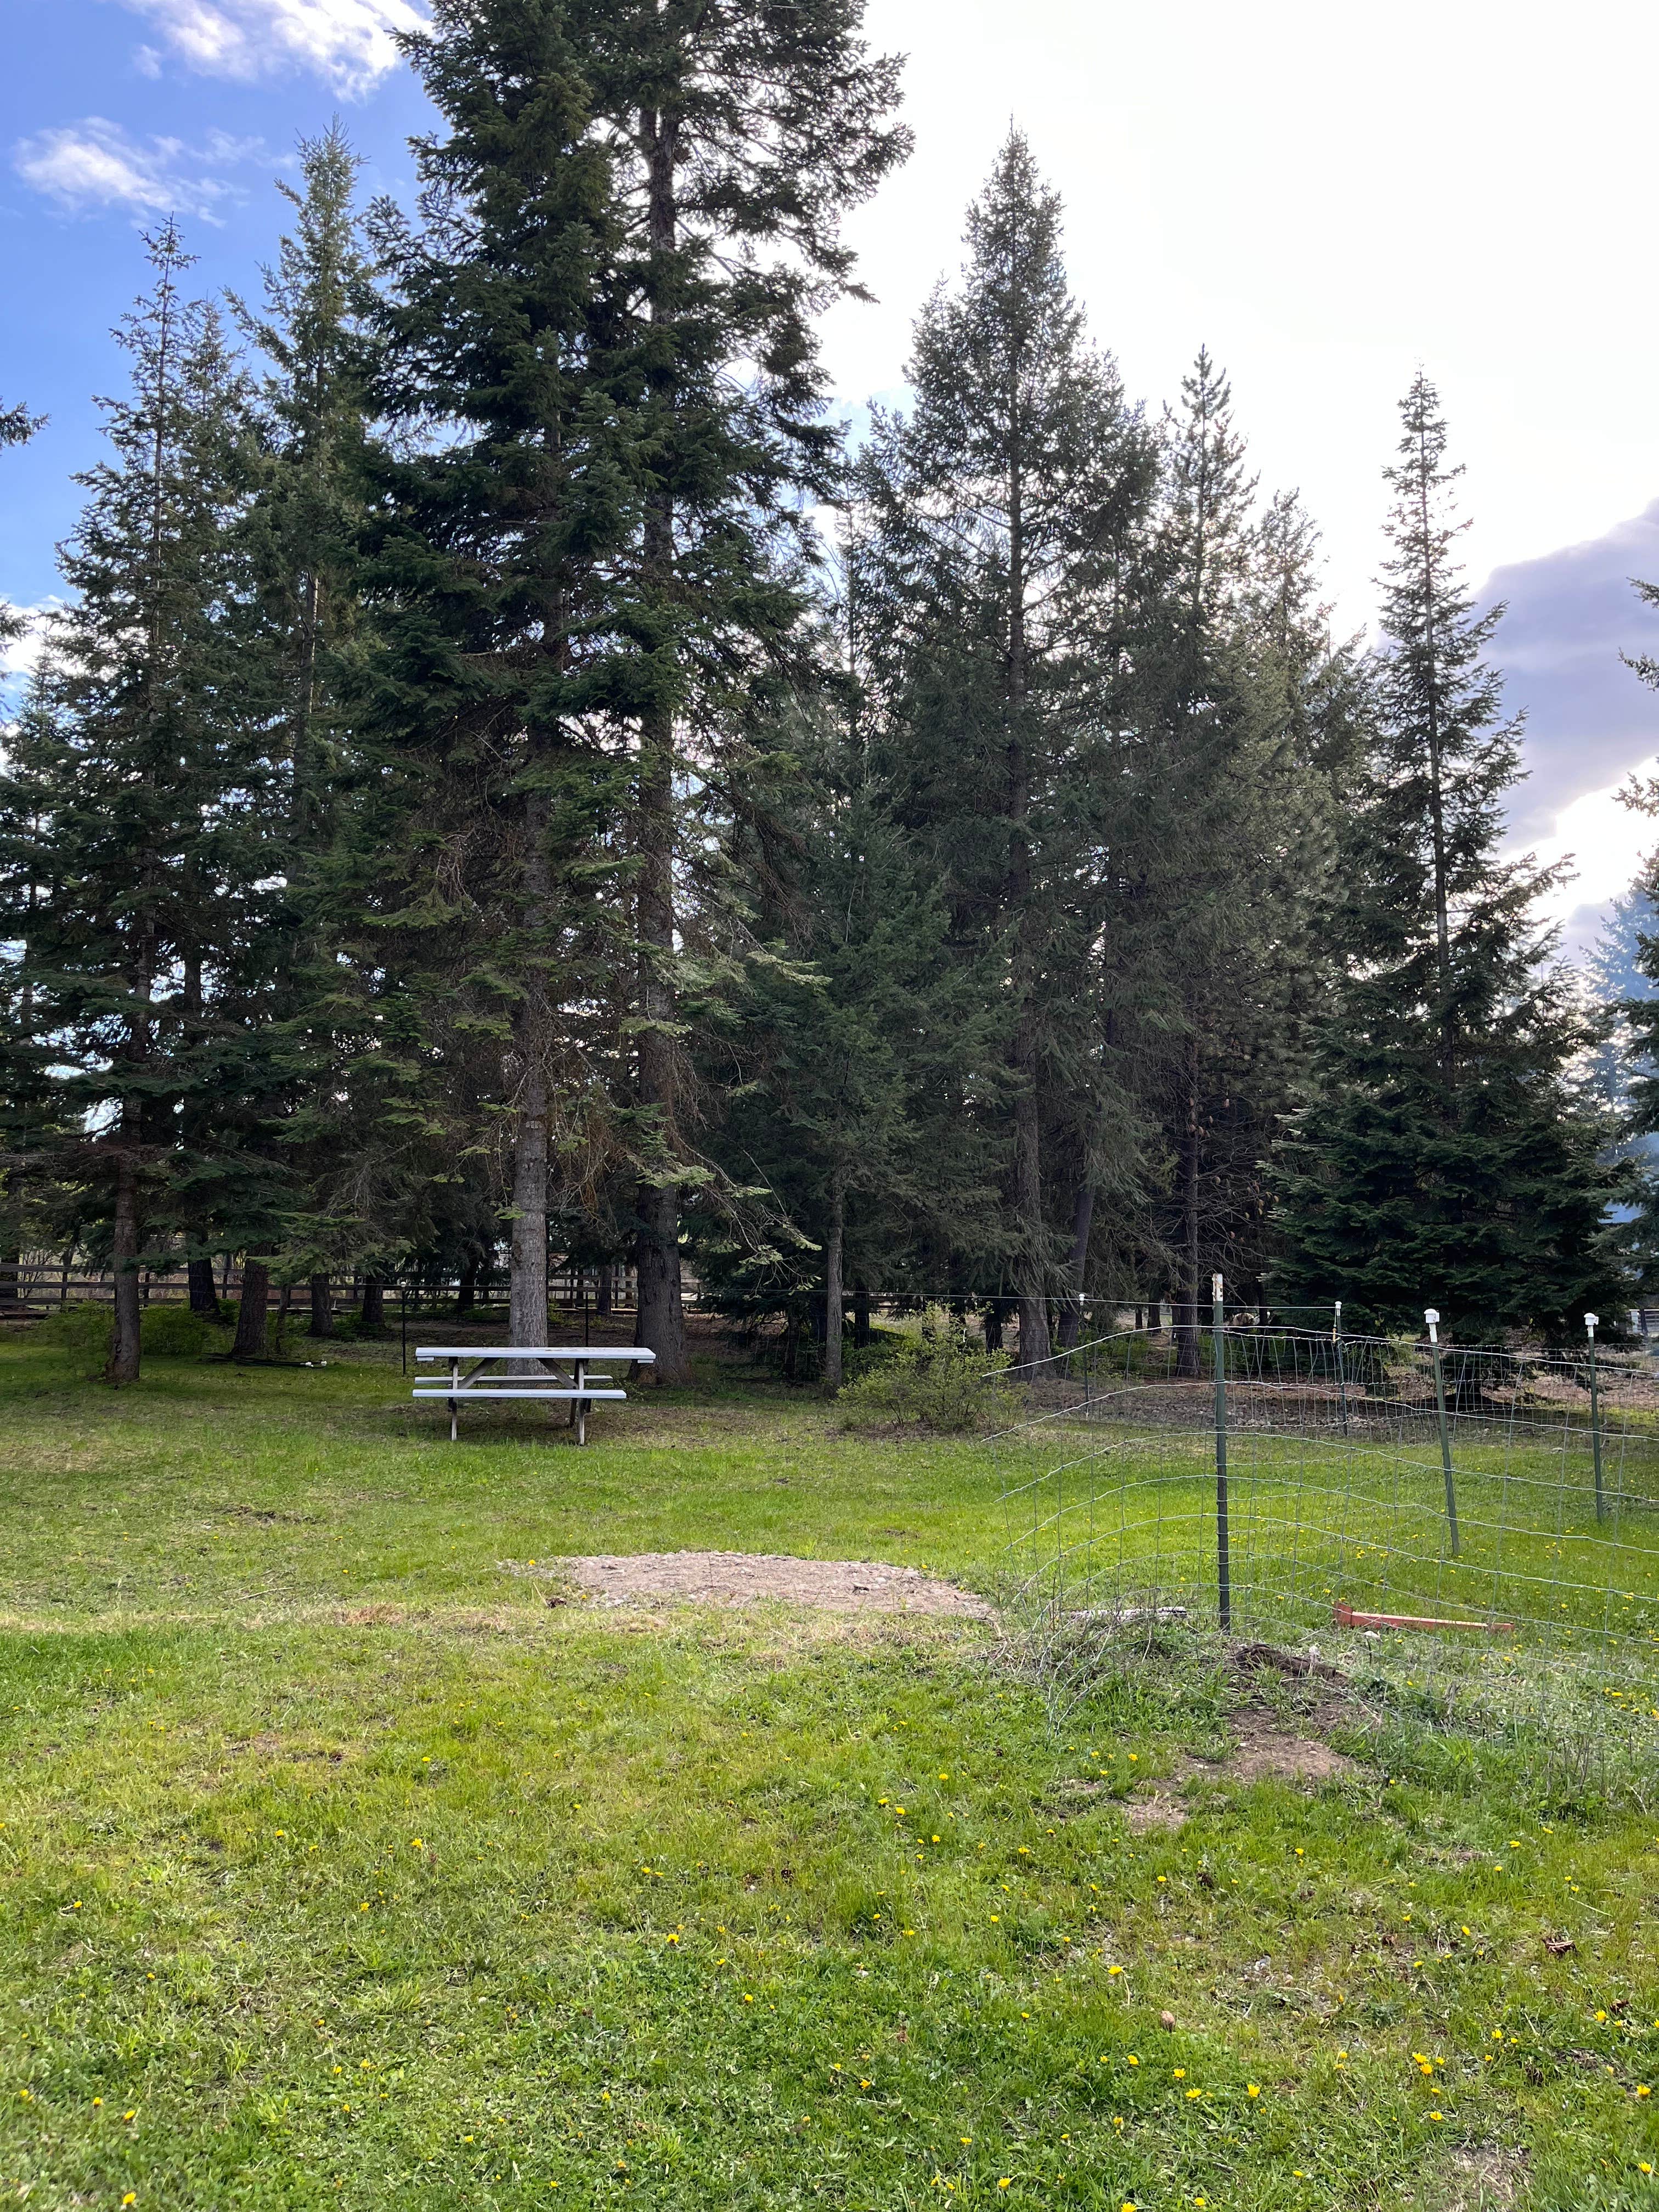 Camper submitted image from Son Mountain Ranch, Athol Idaho - 2